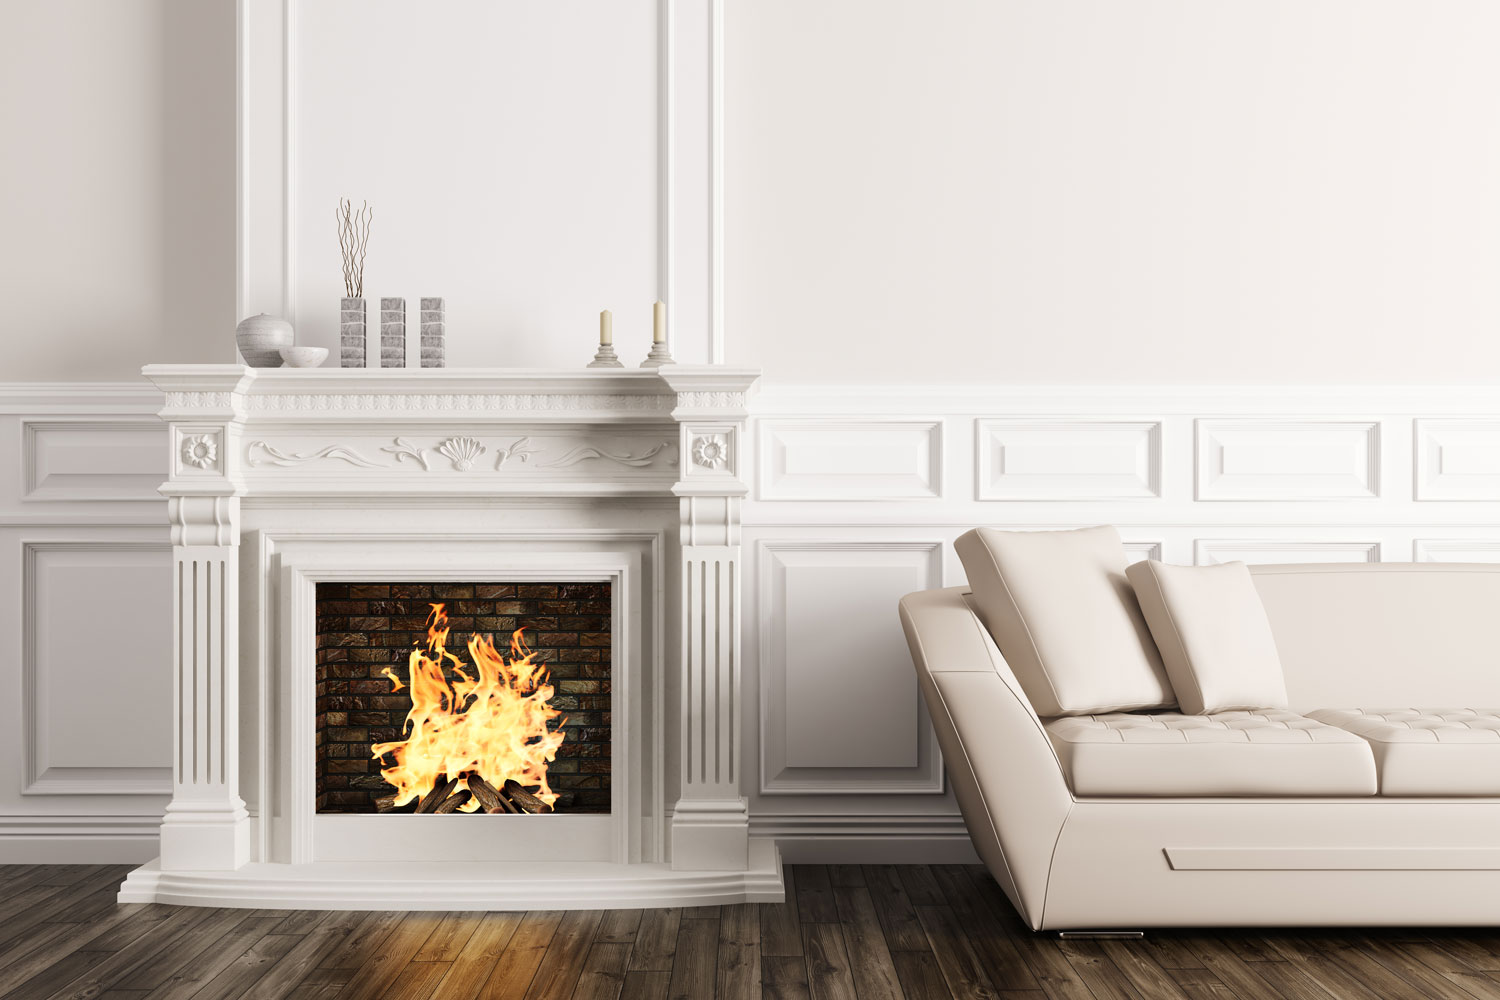 White mantel fireplace with an old mid century design